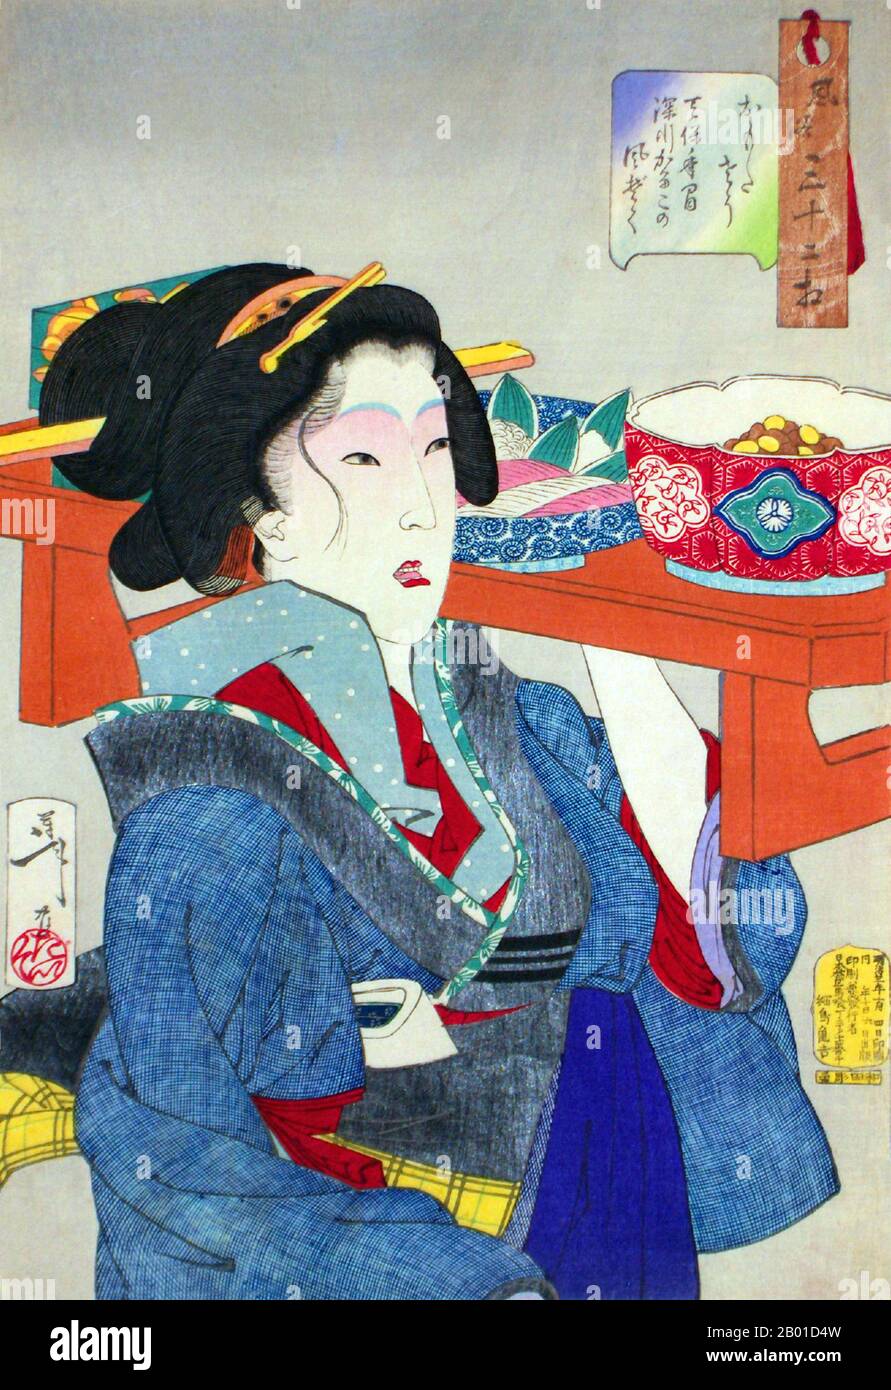 Japan: 'Looking Weighed-down - The Appearance of a Waitress at Fukagawa in the Tempo Era'. Ukiyo-e woodblock print from the series 'Thirty Two Aspects of Women' by Tsukioka Yoshitoshi (30 April 1839 - 9 June 1892), 1888.   The waitress is carrying a tray of rice, sashimi and beans.  Tsukioka Yoshitoshi, also named Taiso Yoshitoshi, was a Japanese artist. He is widely recognised as the last great master of Ukiyo-e, a type of Japanese woodblock printing. He is additionally regarded as one of the form's greatest innovators. Stock Photo